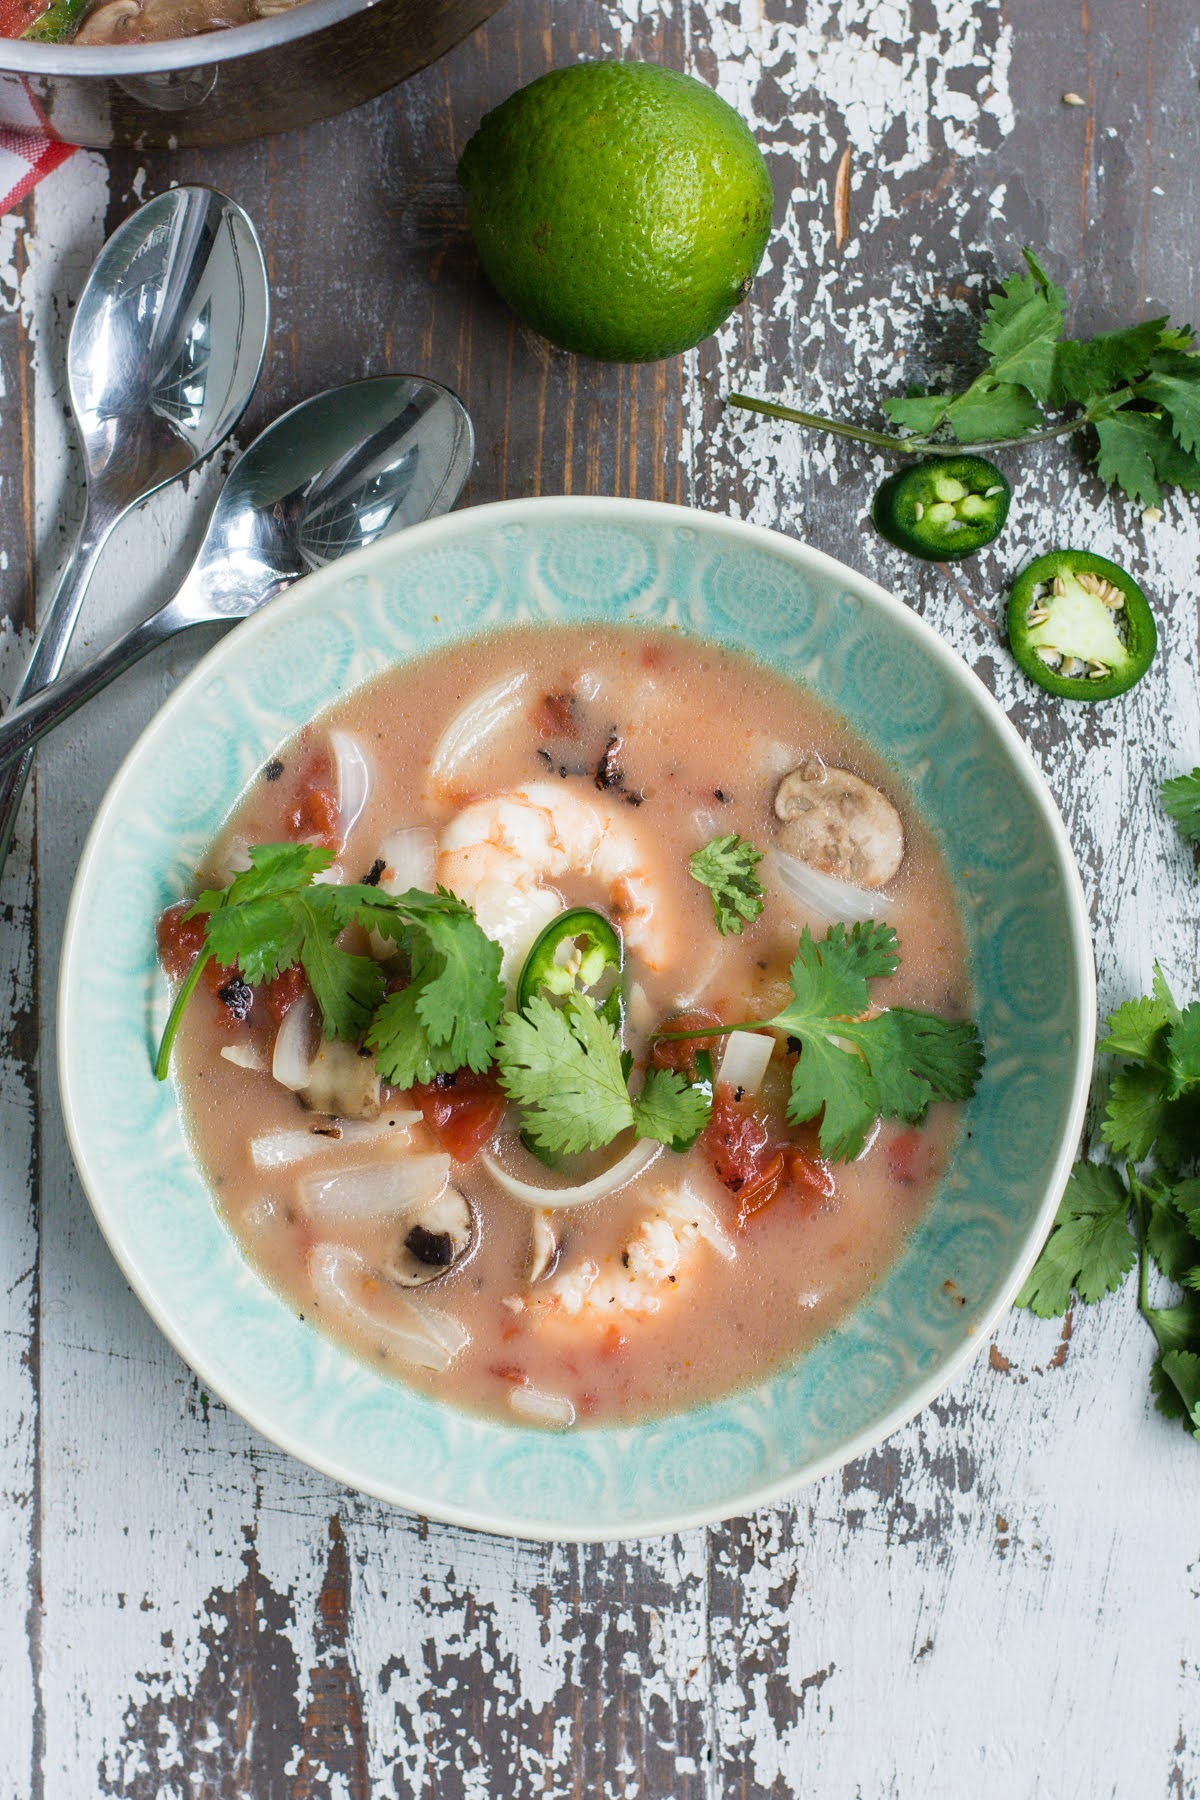 A bowl of Thai soup with shrimp, garnished with cilantro.